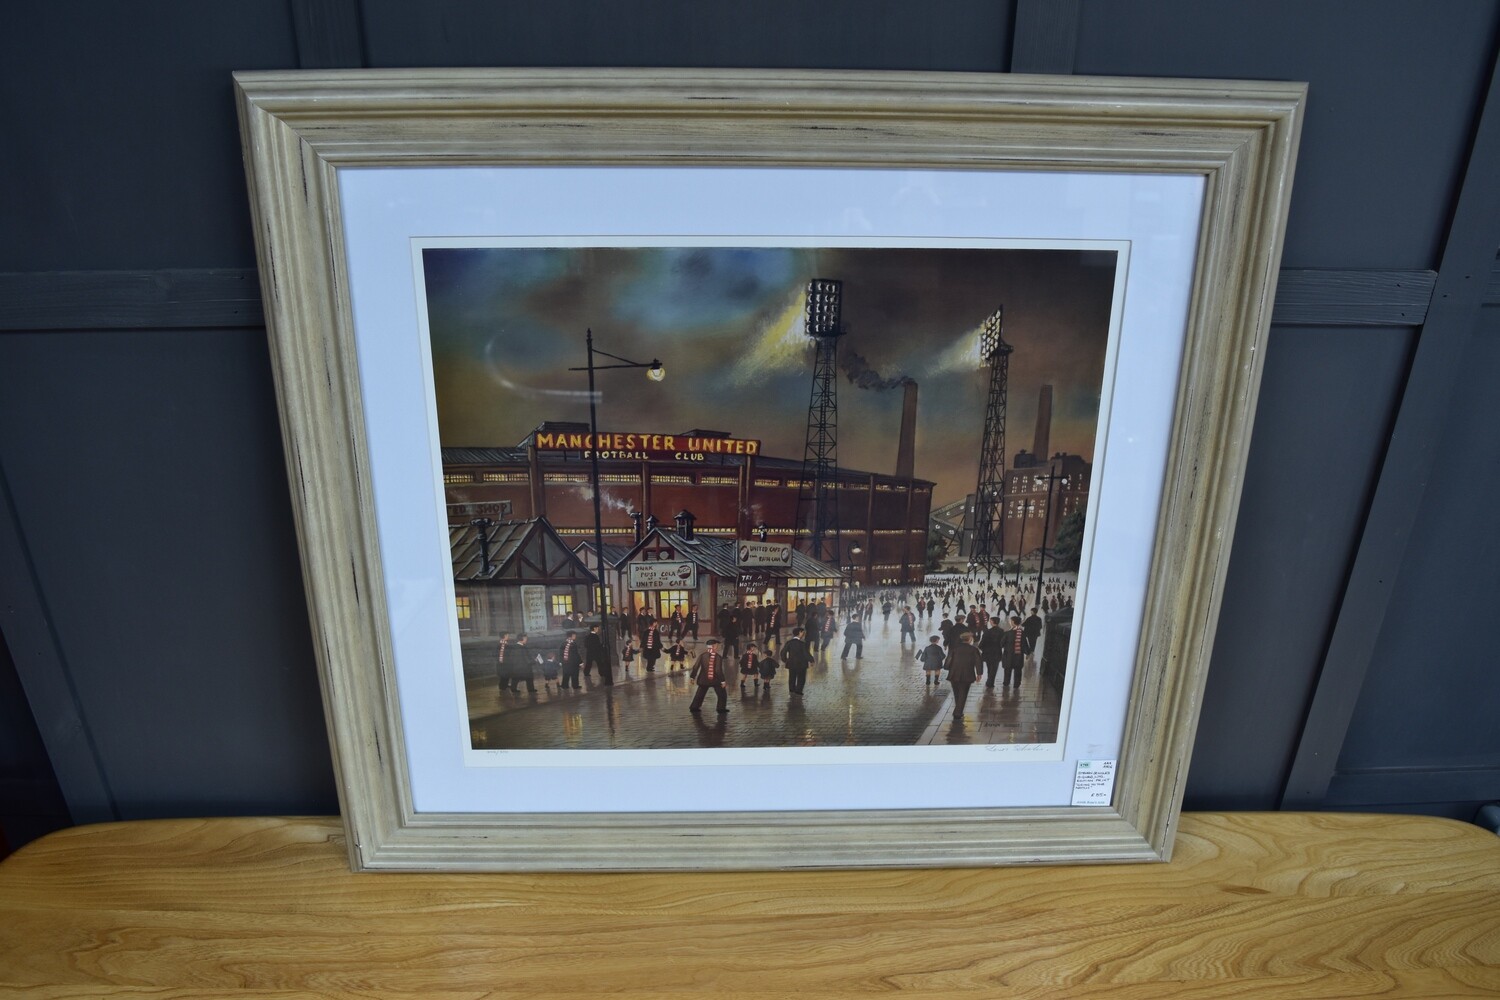 Steven Scholes Signed Ltd. Edition Print "Going to the Match"